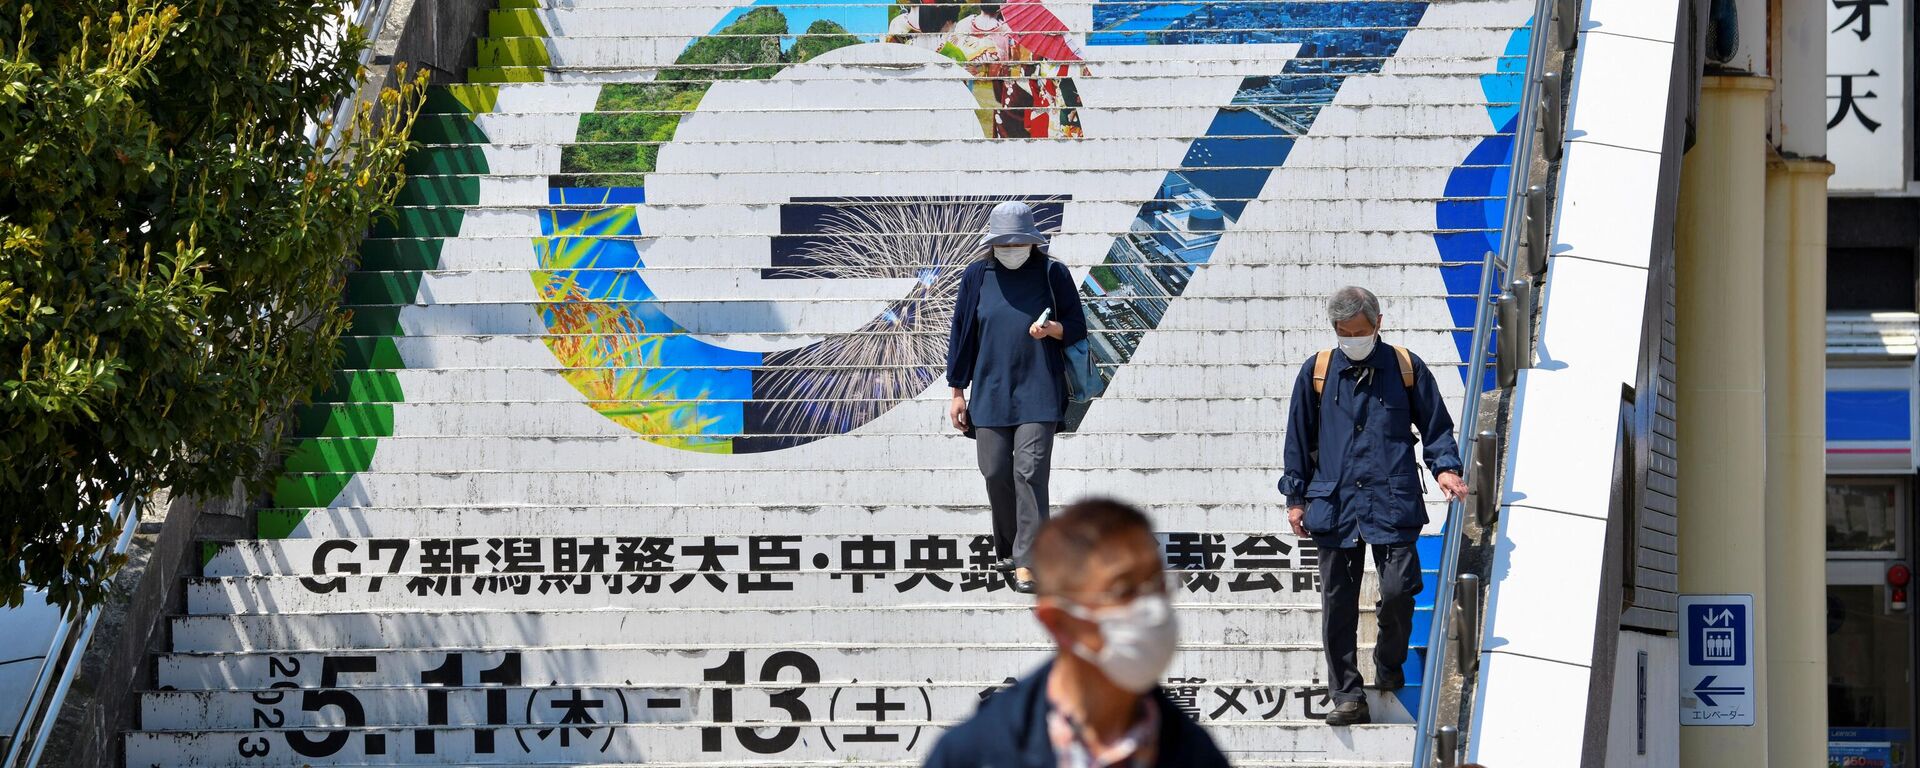 People walk down stairs displaying the logo of the upcoming G7 Finance Ministers and Central Bank Governors' Meeting at Niigata railway station in Niigata on May 10, 2023 - Sputnik International, 1920, 22.05.2023